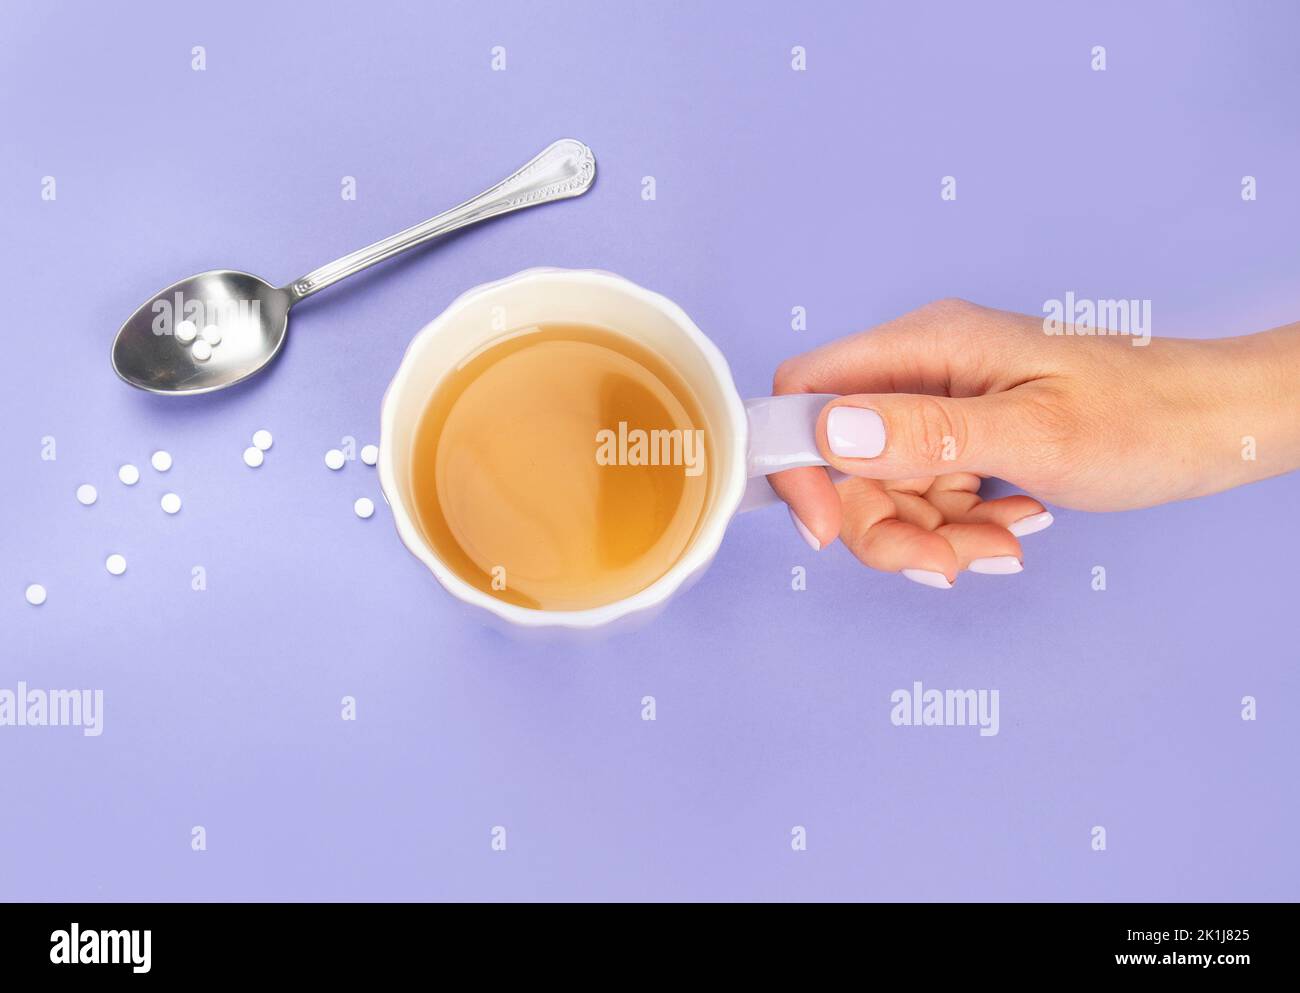 Tea cup with suagr substitute on color background. The concept of healthy eating. Top view, copy space Stock Photo